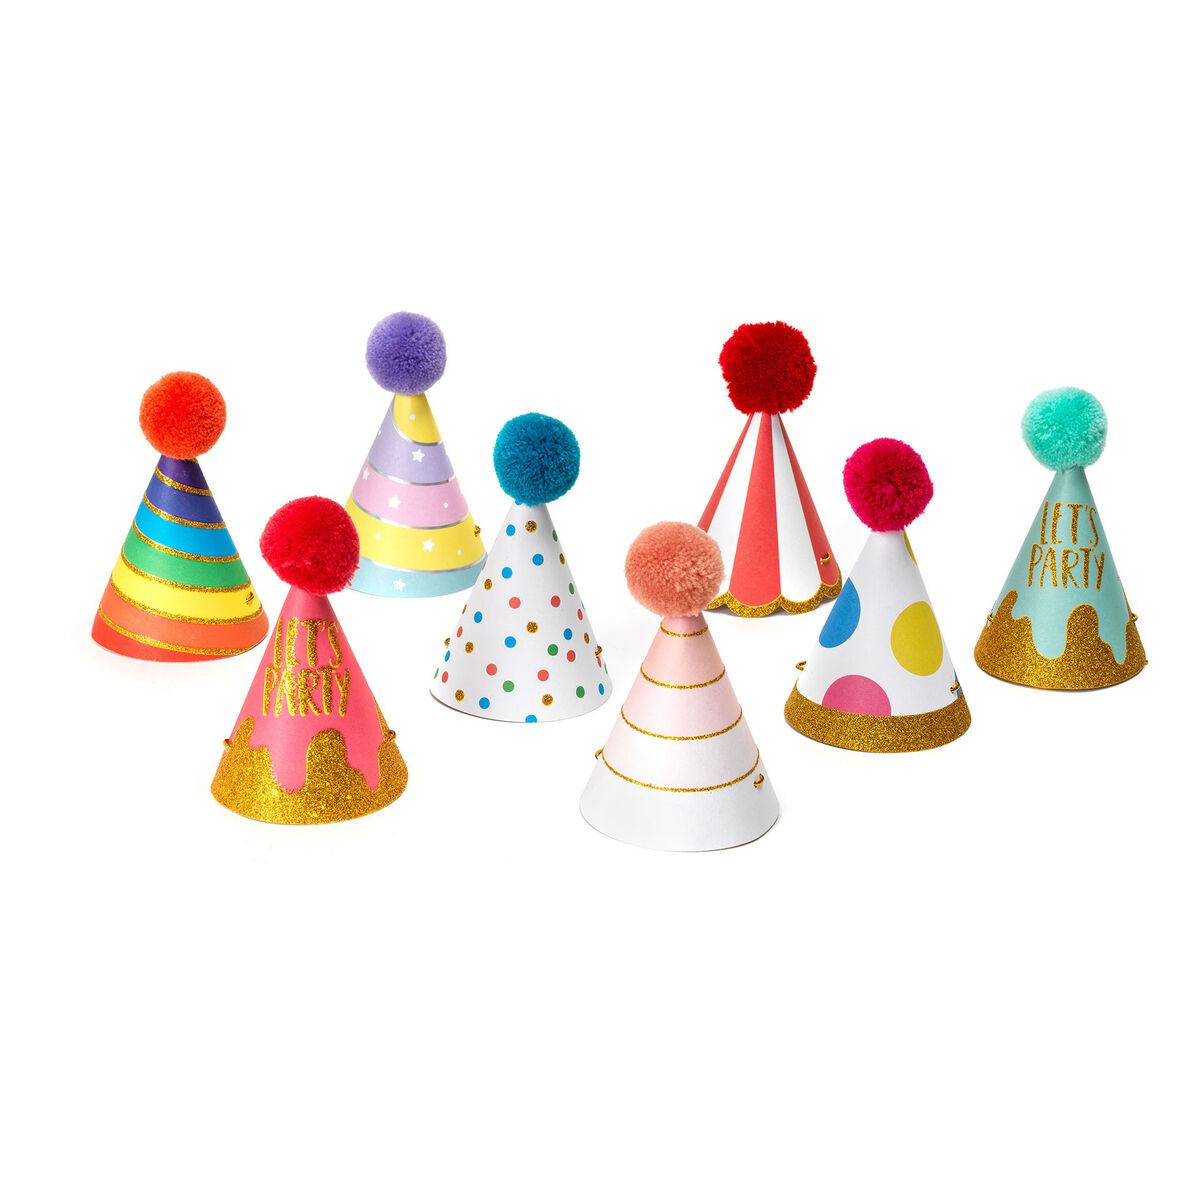 The Party is On - Set of 8 Party Hats, , zoo